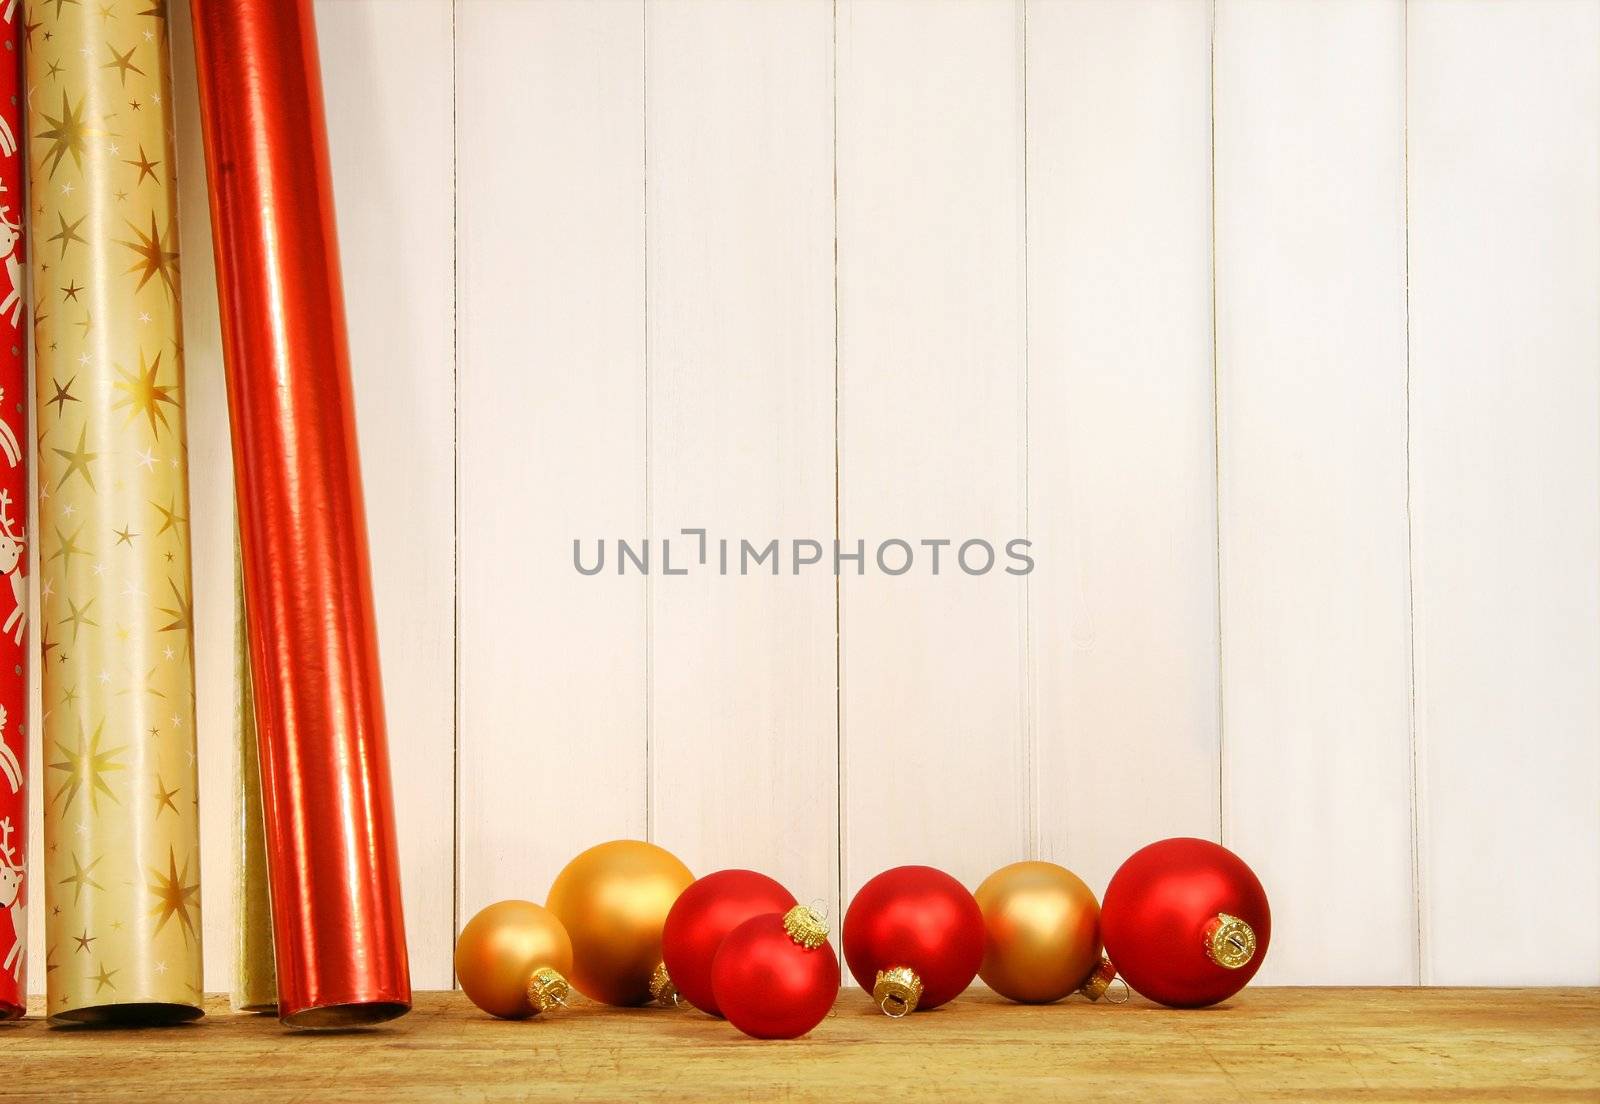 Rolls of holiday wrapping paper by Sandralise